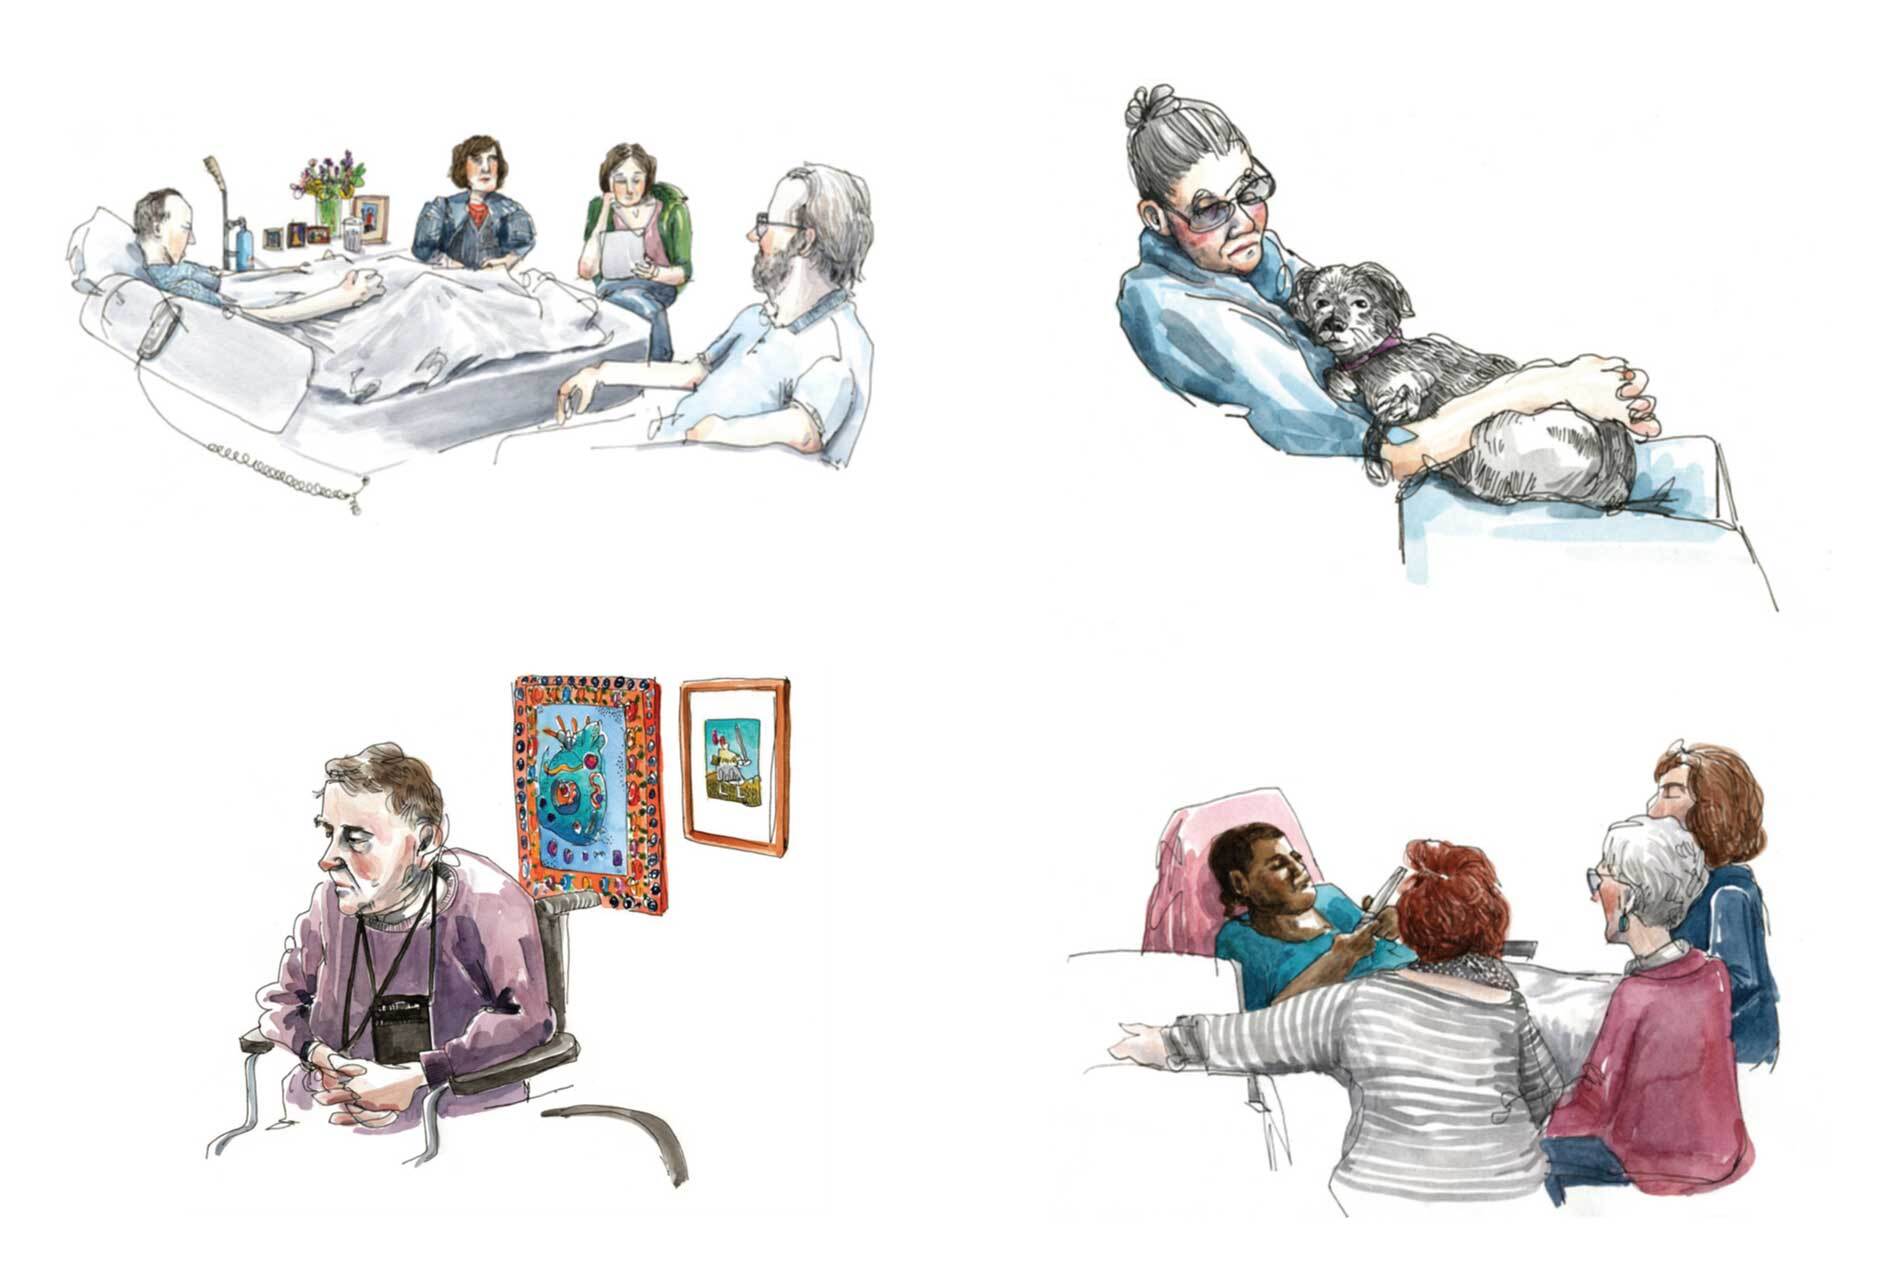 A collage of colorful illustrations that depict scenes from hospice care, with figures in bed as other figures sit around them.